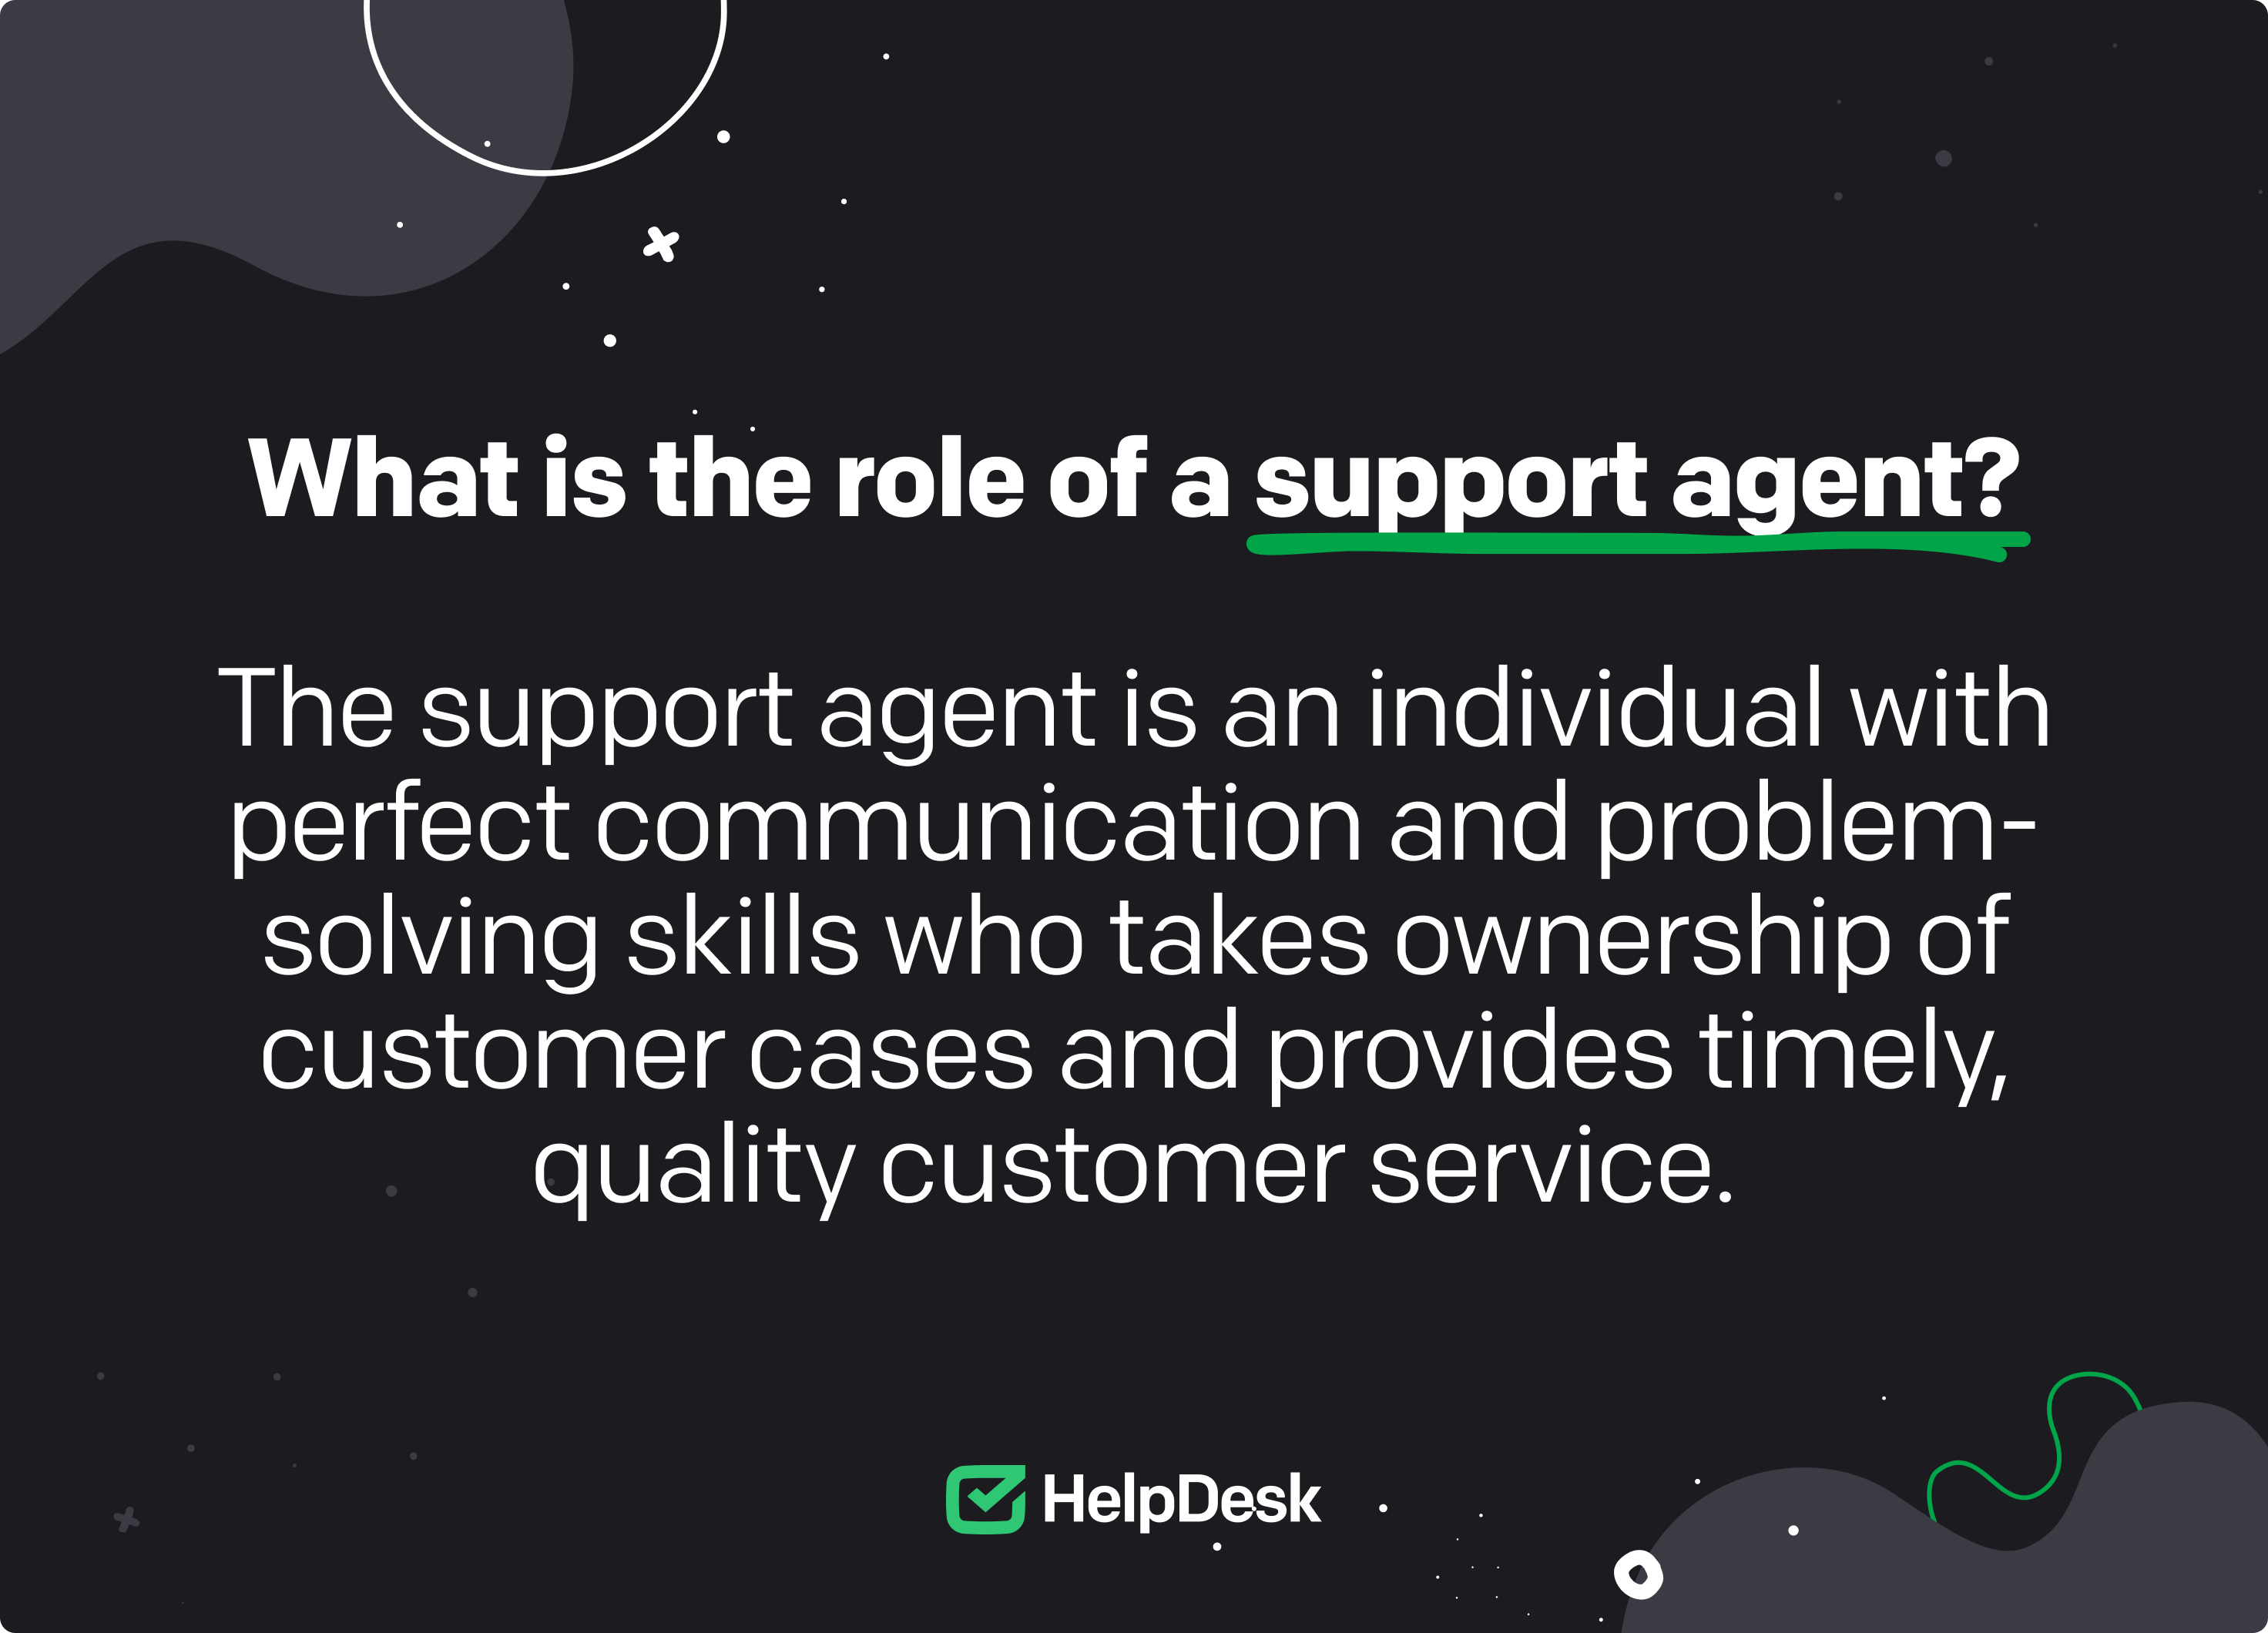 Who is a support agent? Definition of what the role of a support agent is.